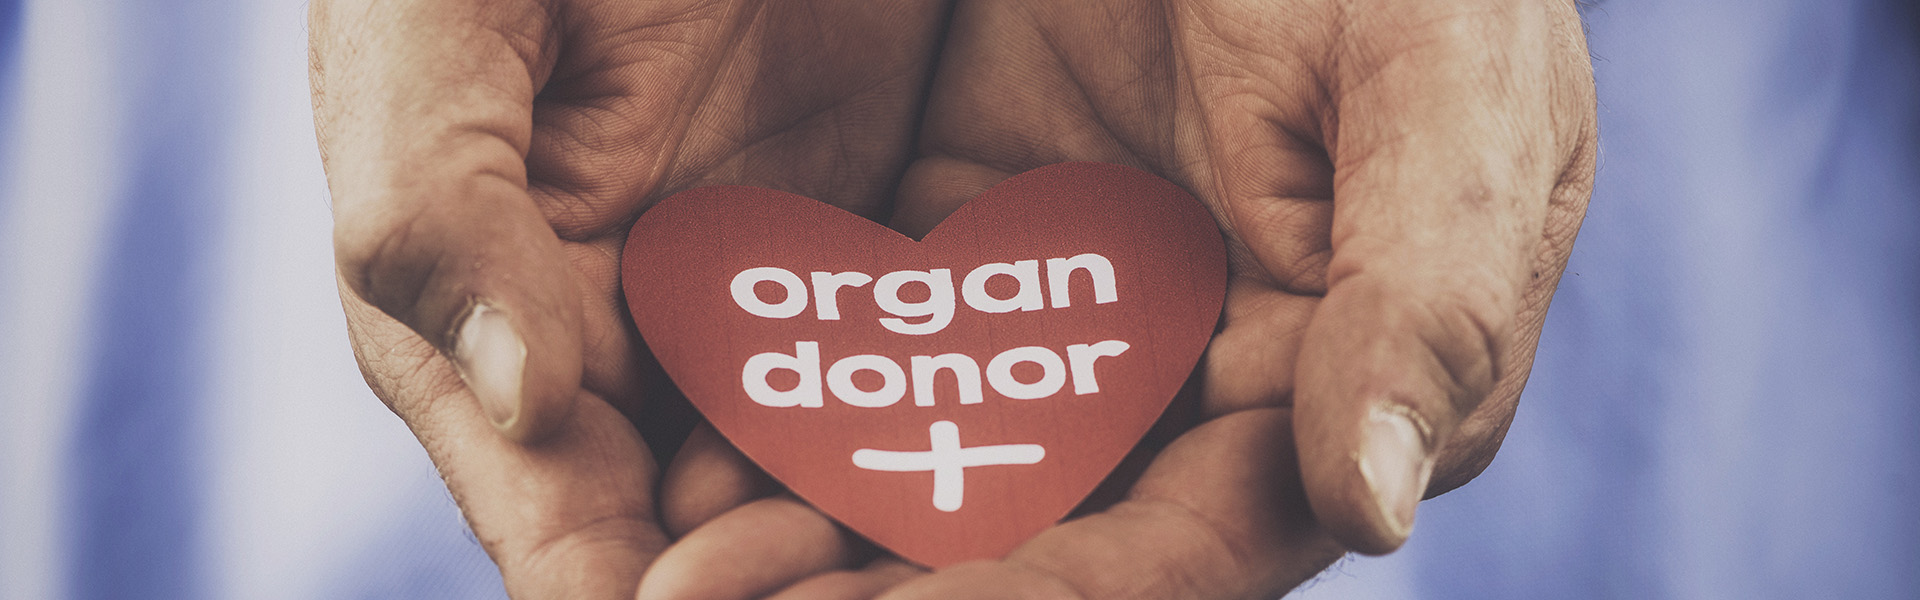 Organ donation: how to register and have conversations with loved ones